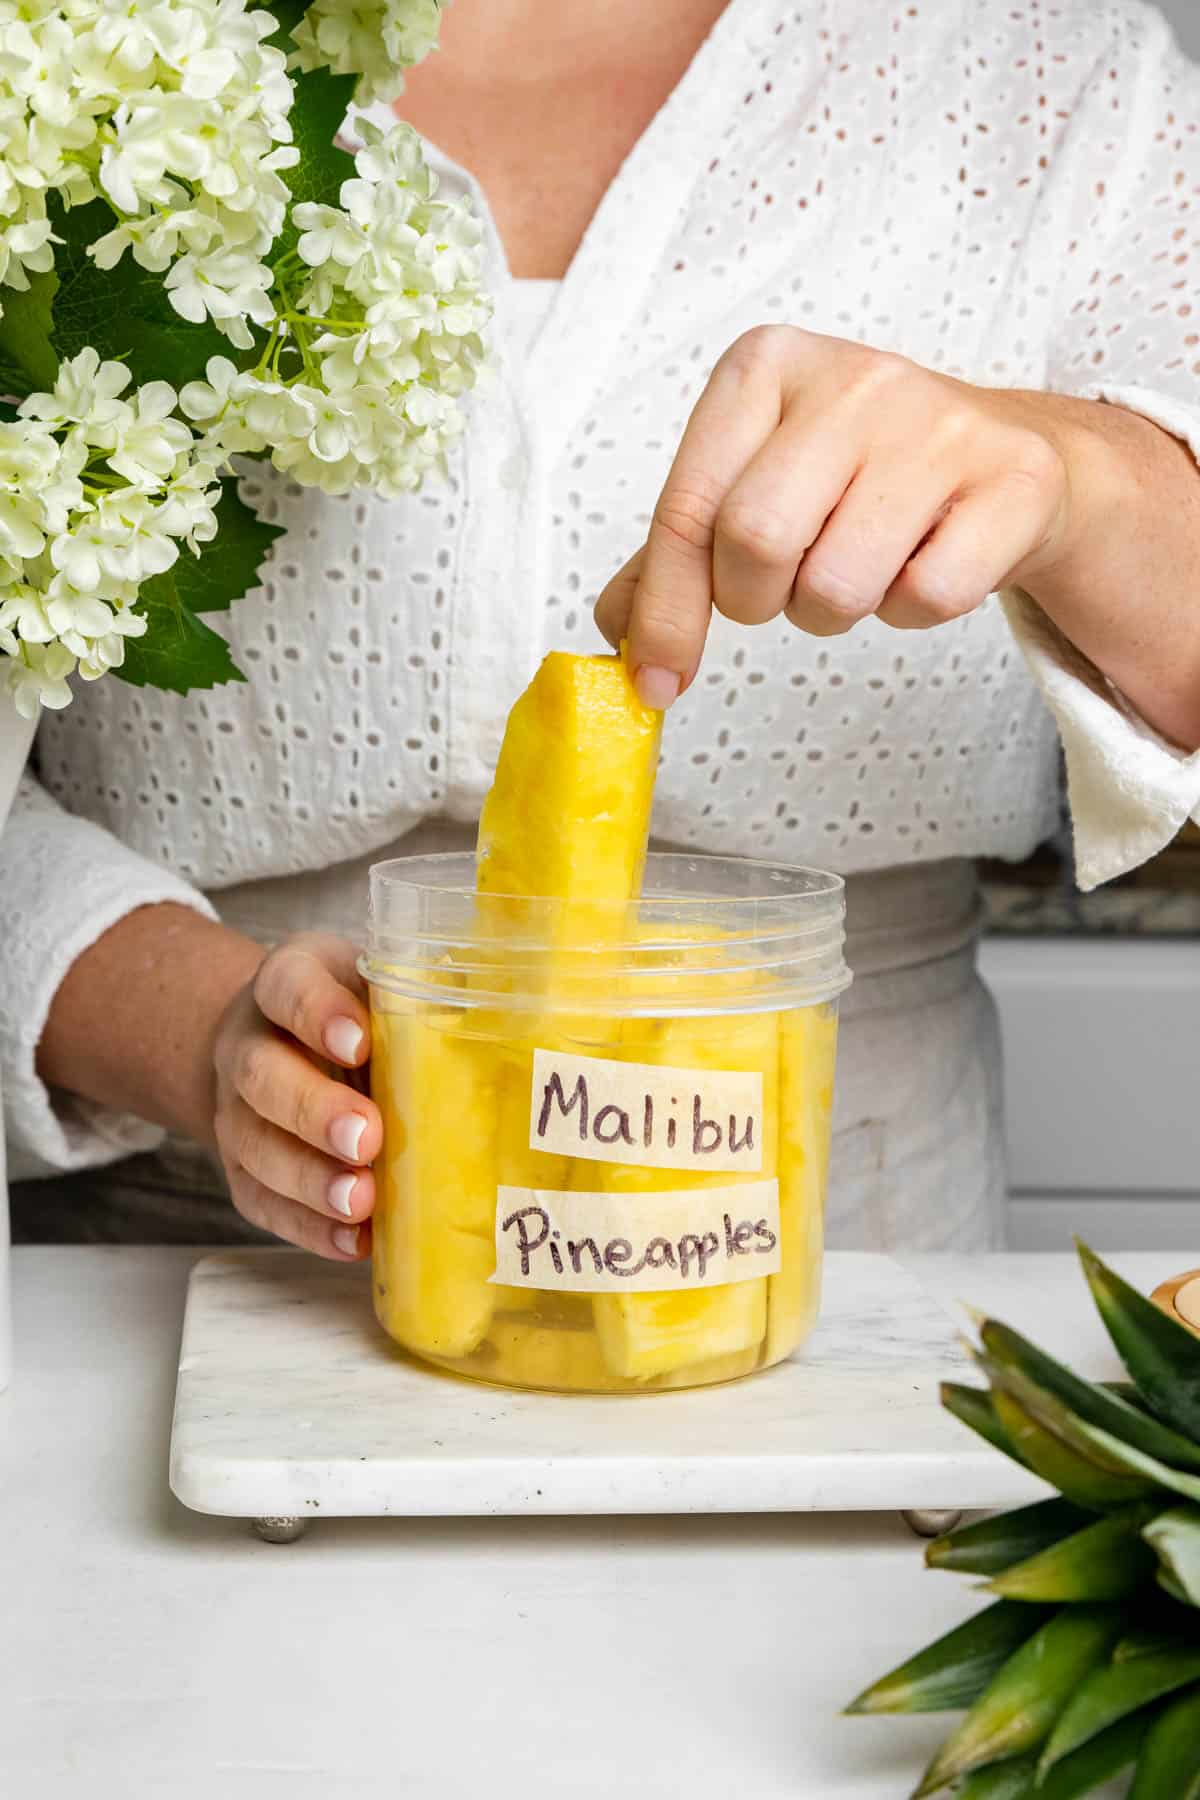 a hand pulling a pineapple spear out of a jar labeled malibu pineapples